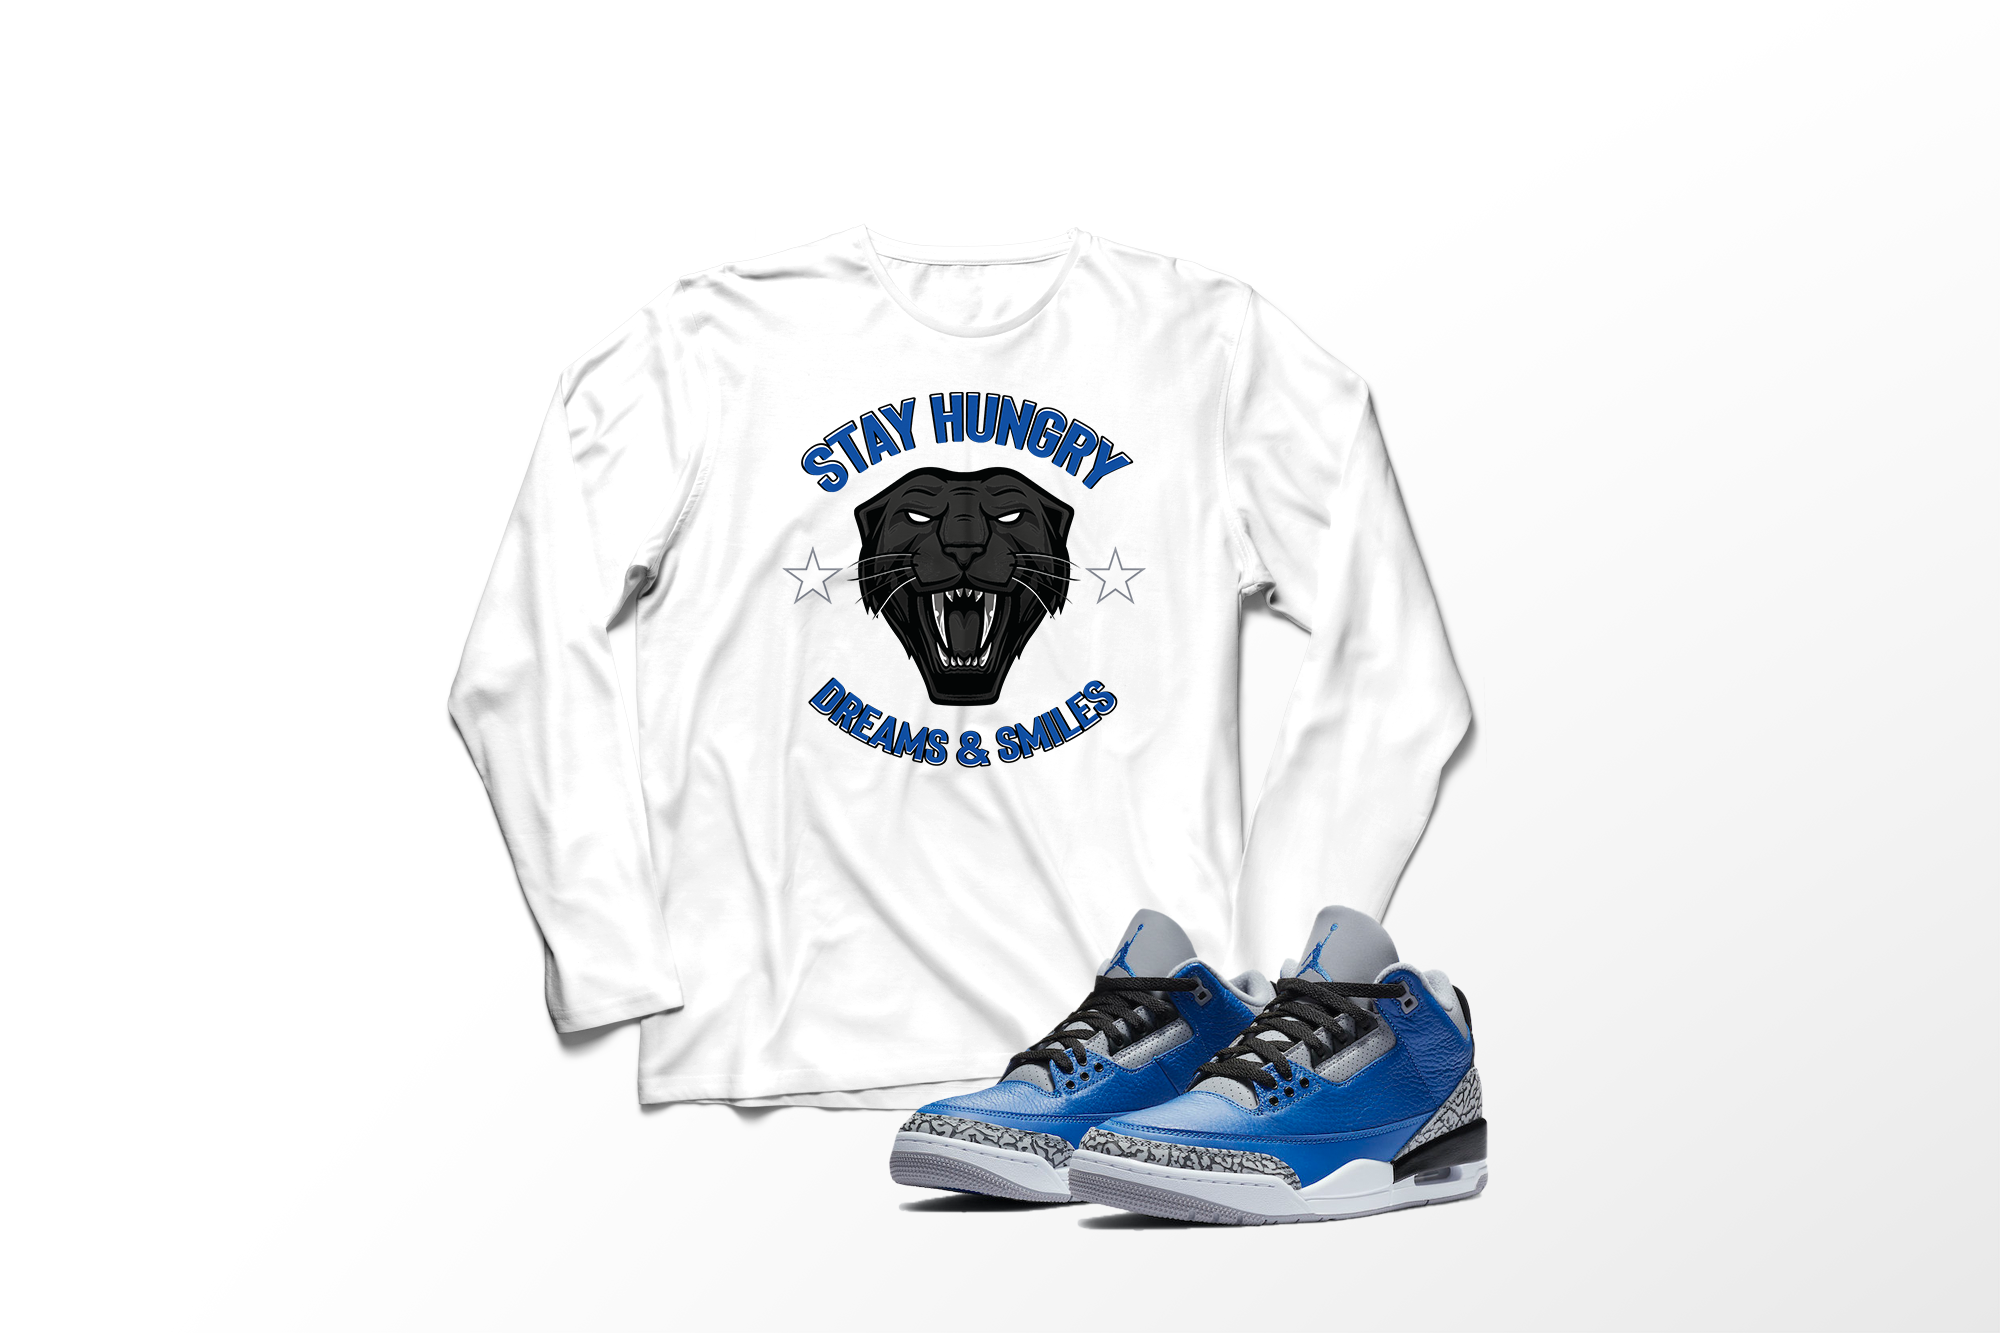 'Stay Hungry' in Royal CW Men's Comfort Long Sleeve